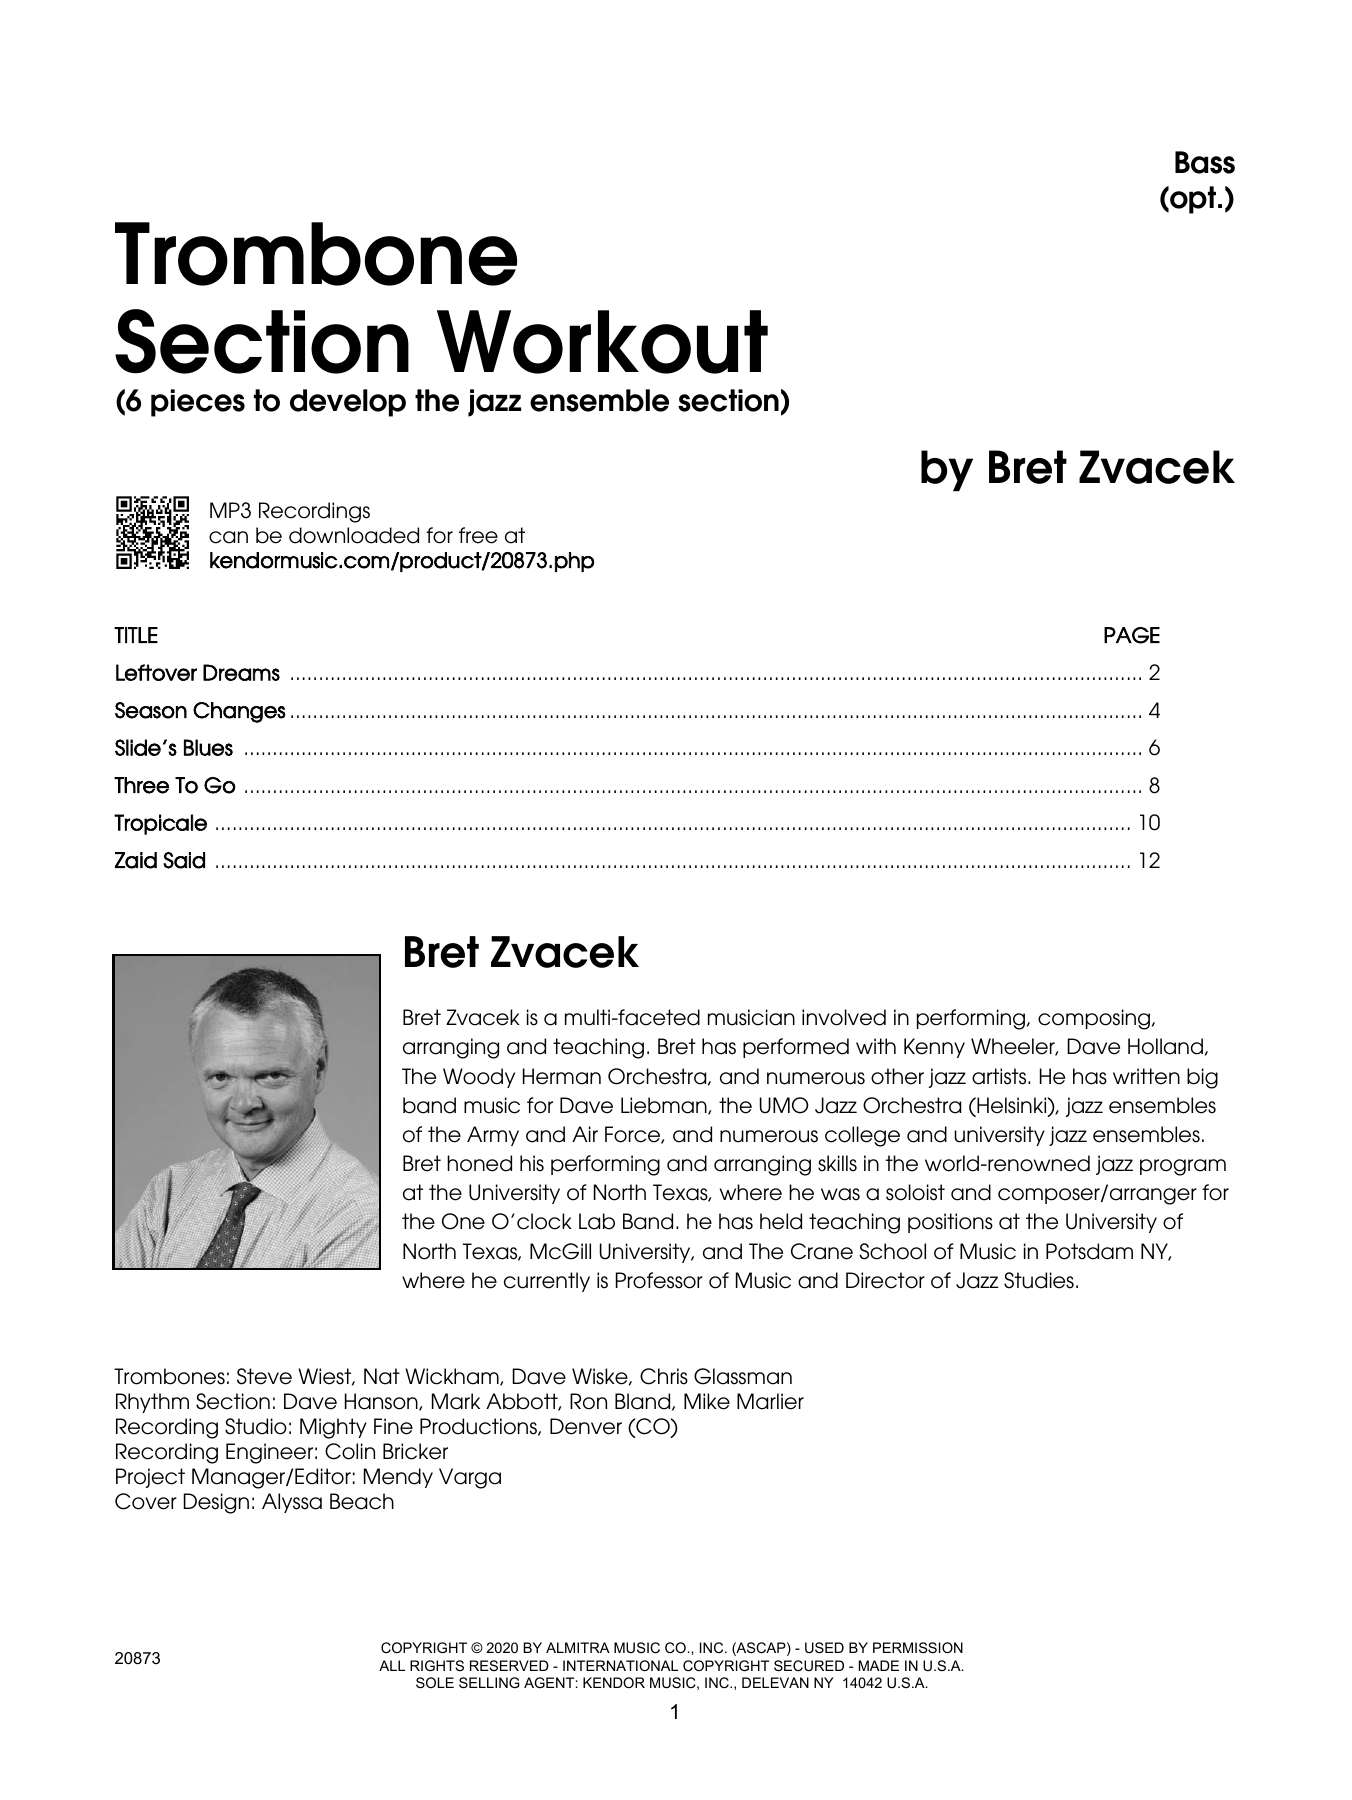 Download Bret Zvacek Trombone Section Workout with MP3's (6 pieces to develop the jazz ensemble section) - Bass sheet music and printable PDF score & Instructional music notes